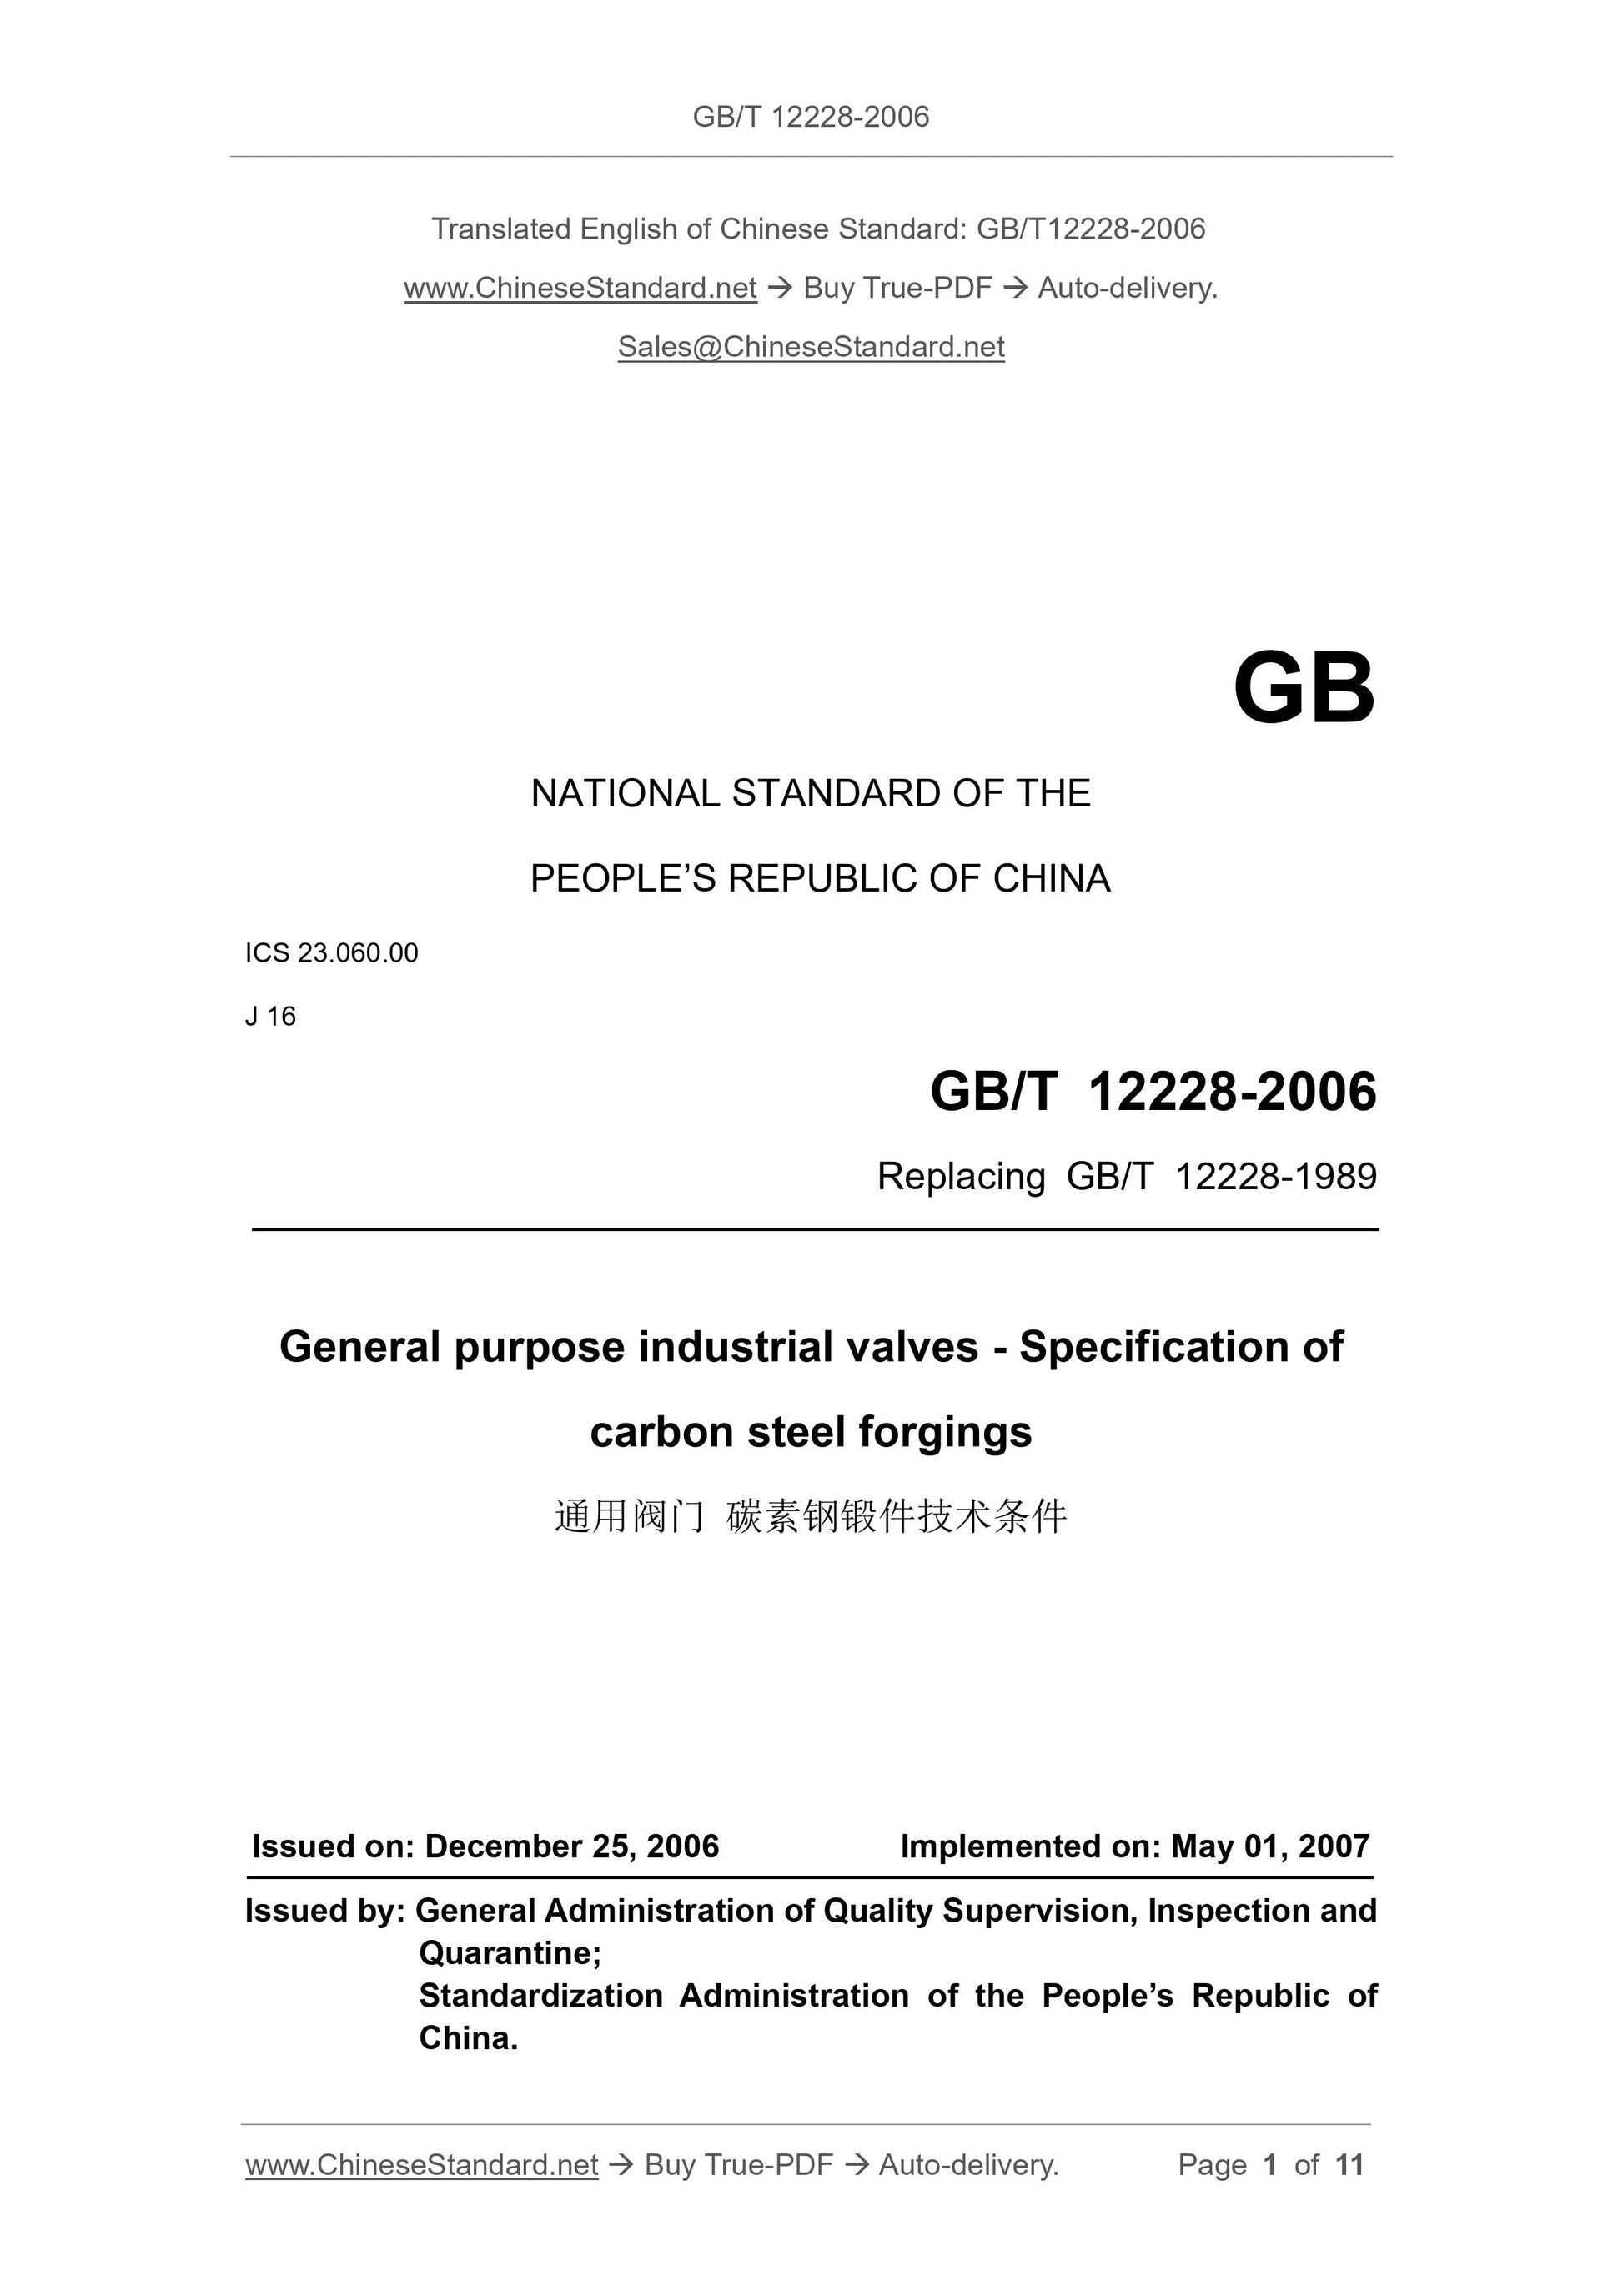 GB/T 12228-2006 Page 1